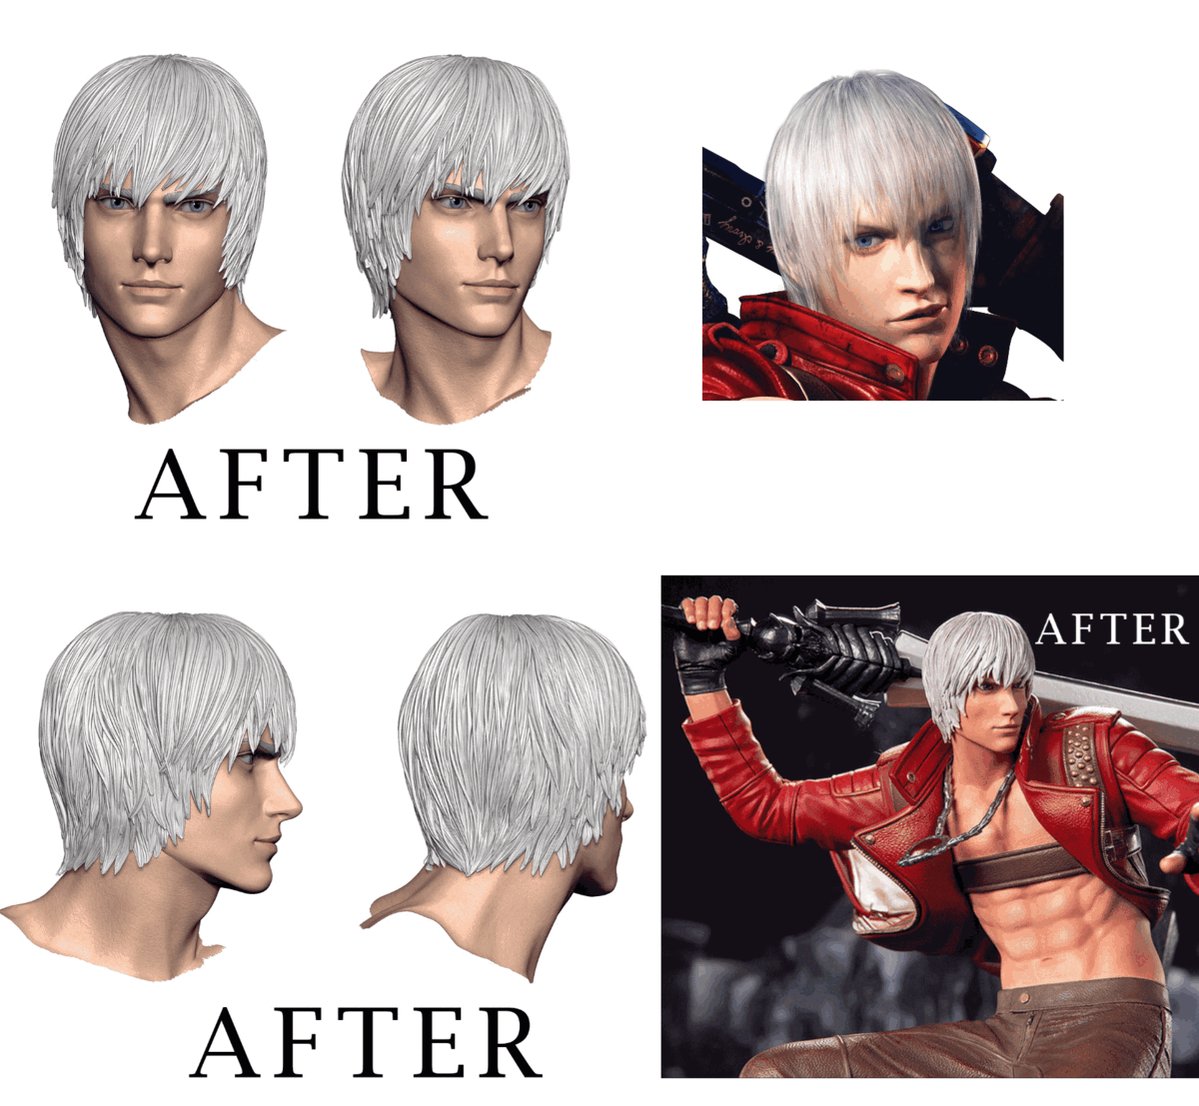 First 4 Figures - DMC fans - opinion requested on updated Dante head!